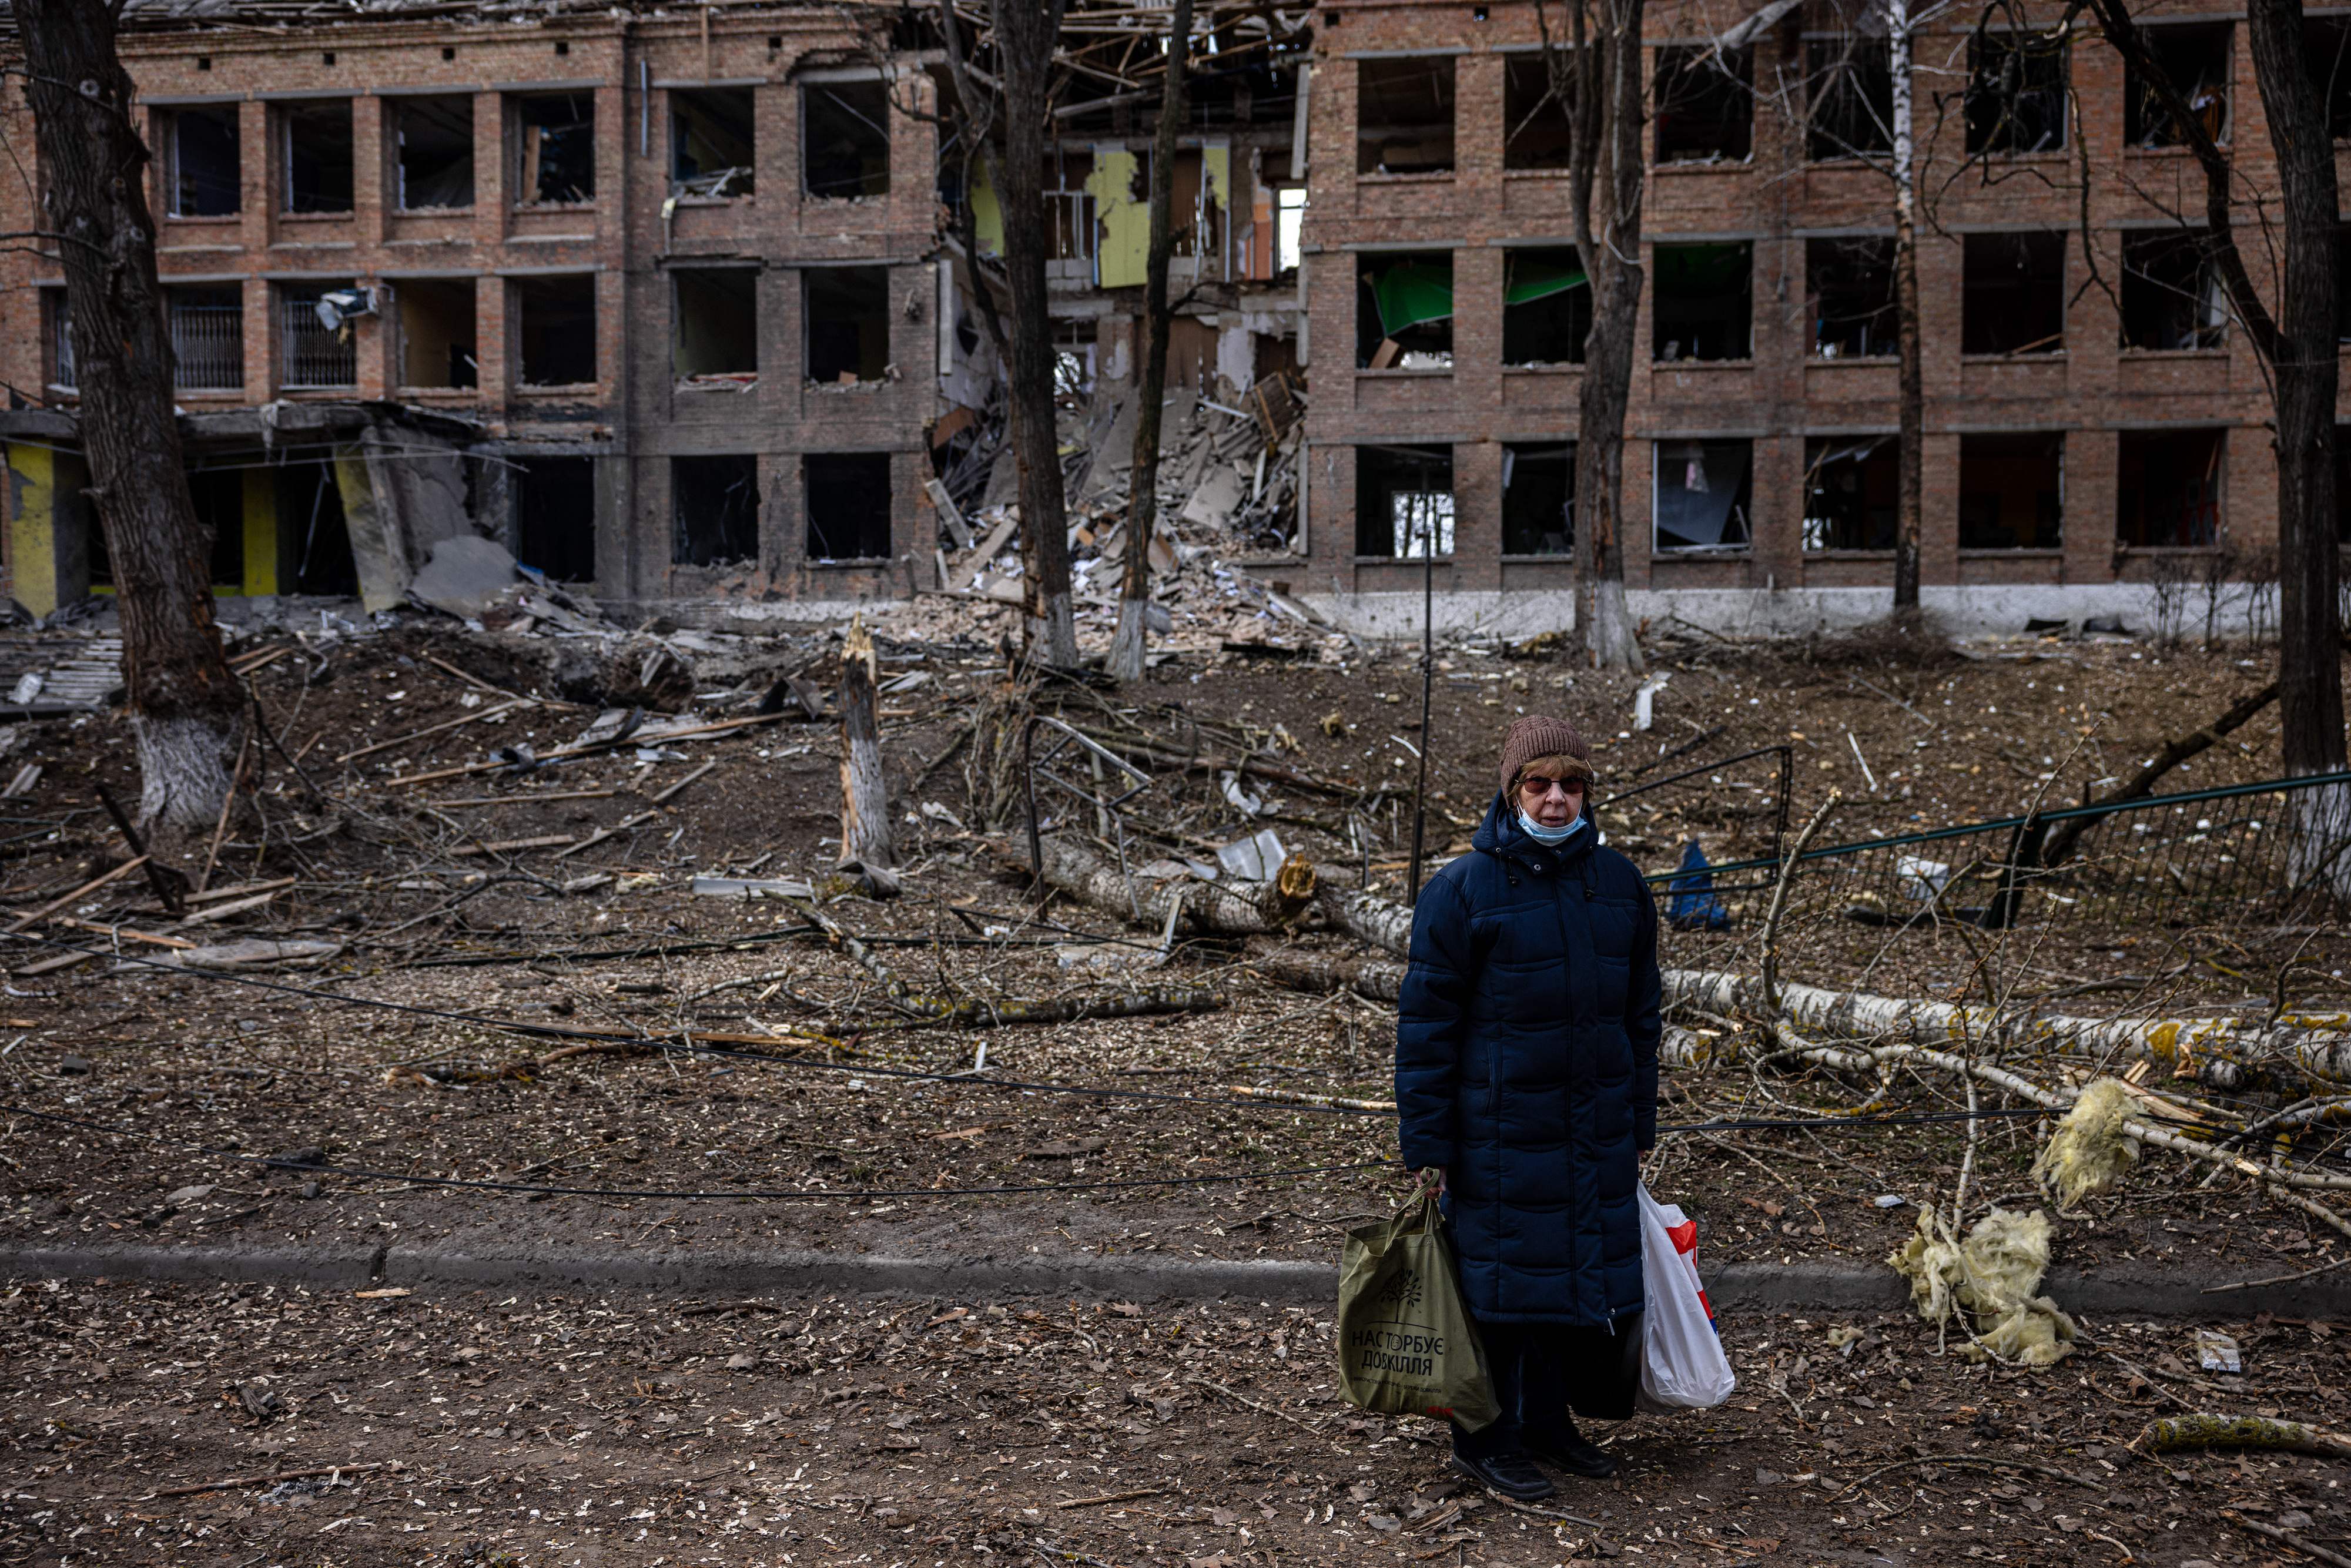 A woman stands in front of a destroyed building after a Russian missile attack in the town of Vasylkiv, near Kyiv